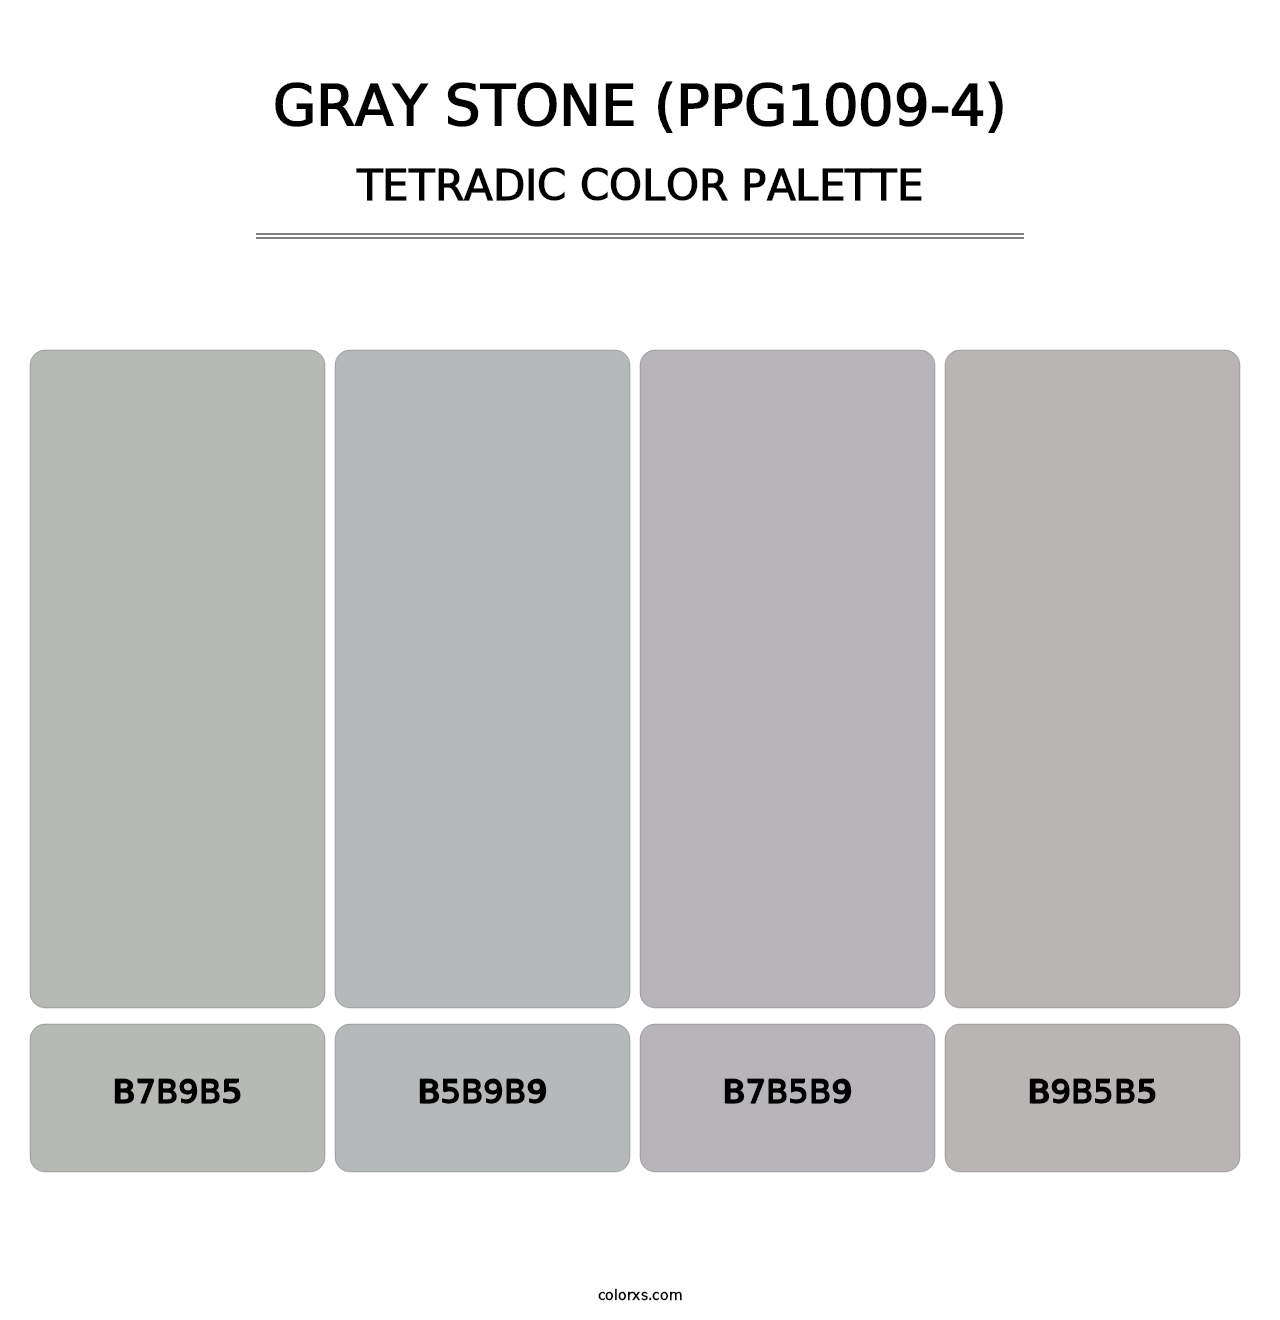 Gray Stone (PPG1009-4) - Tetradic Color Palette